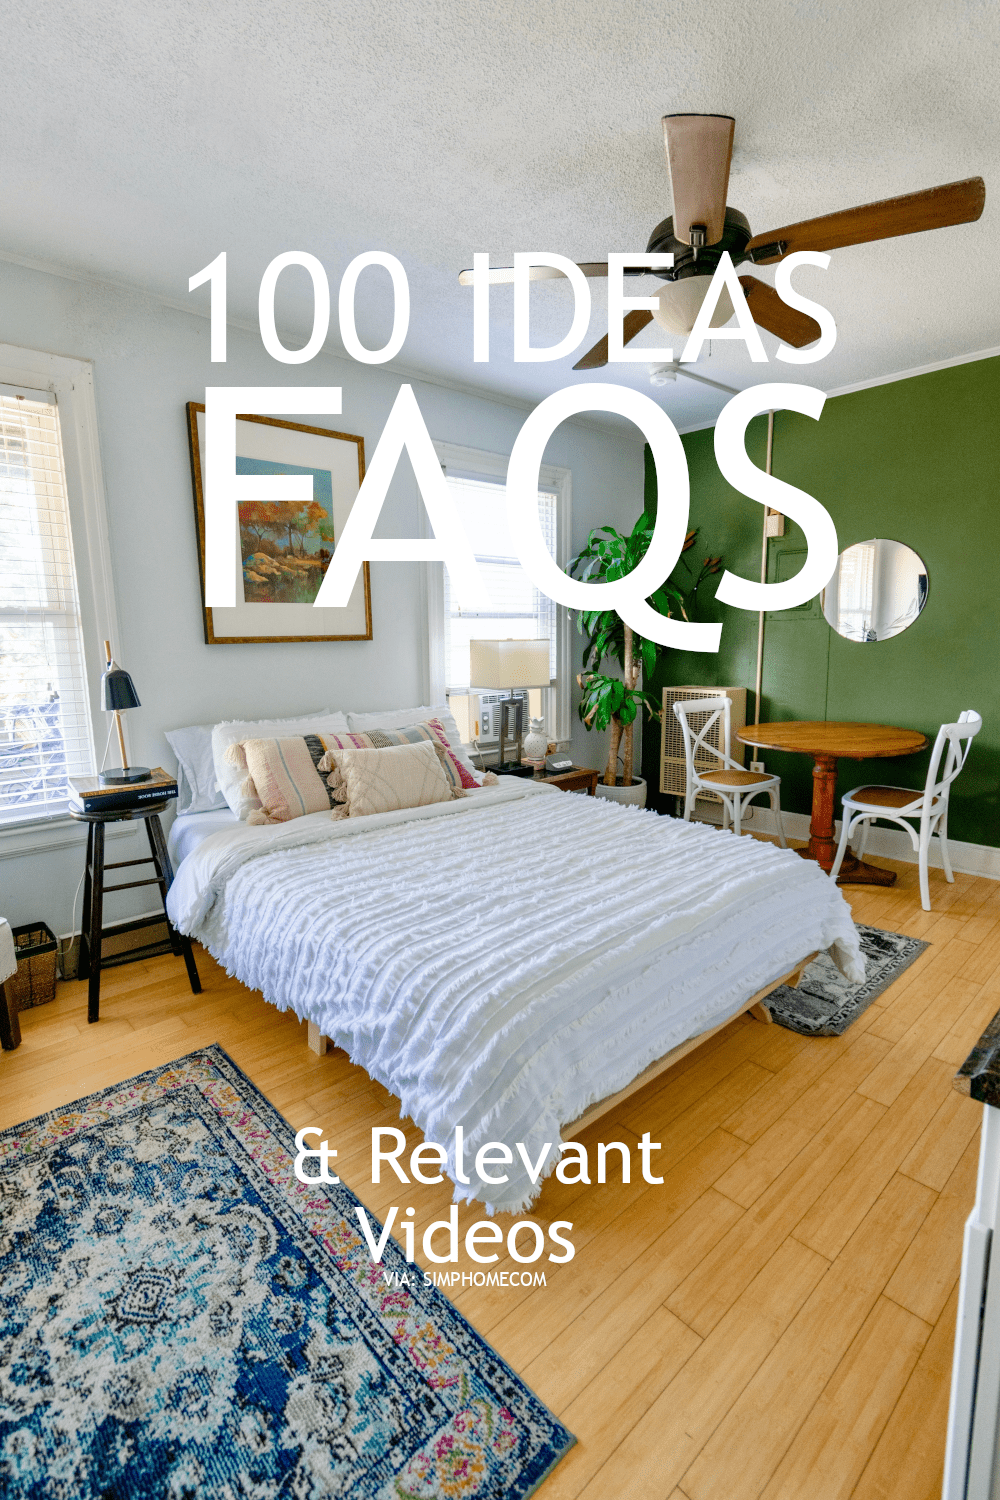 This is 100 Bedroom Ideas for small area include with FAQs and videos